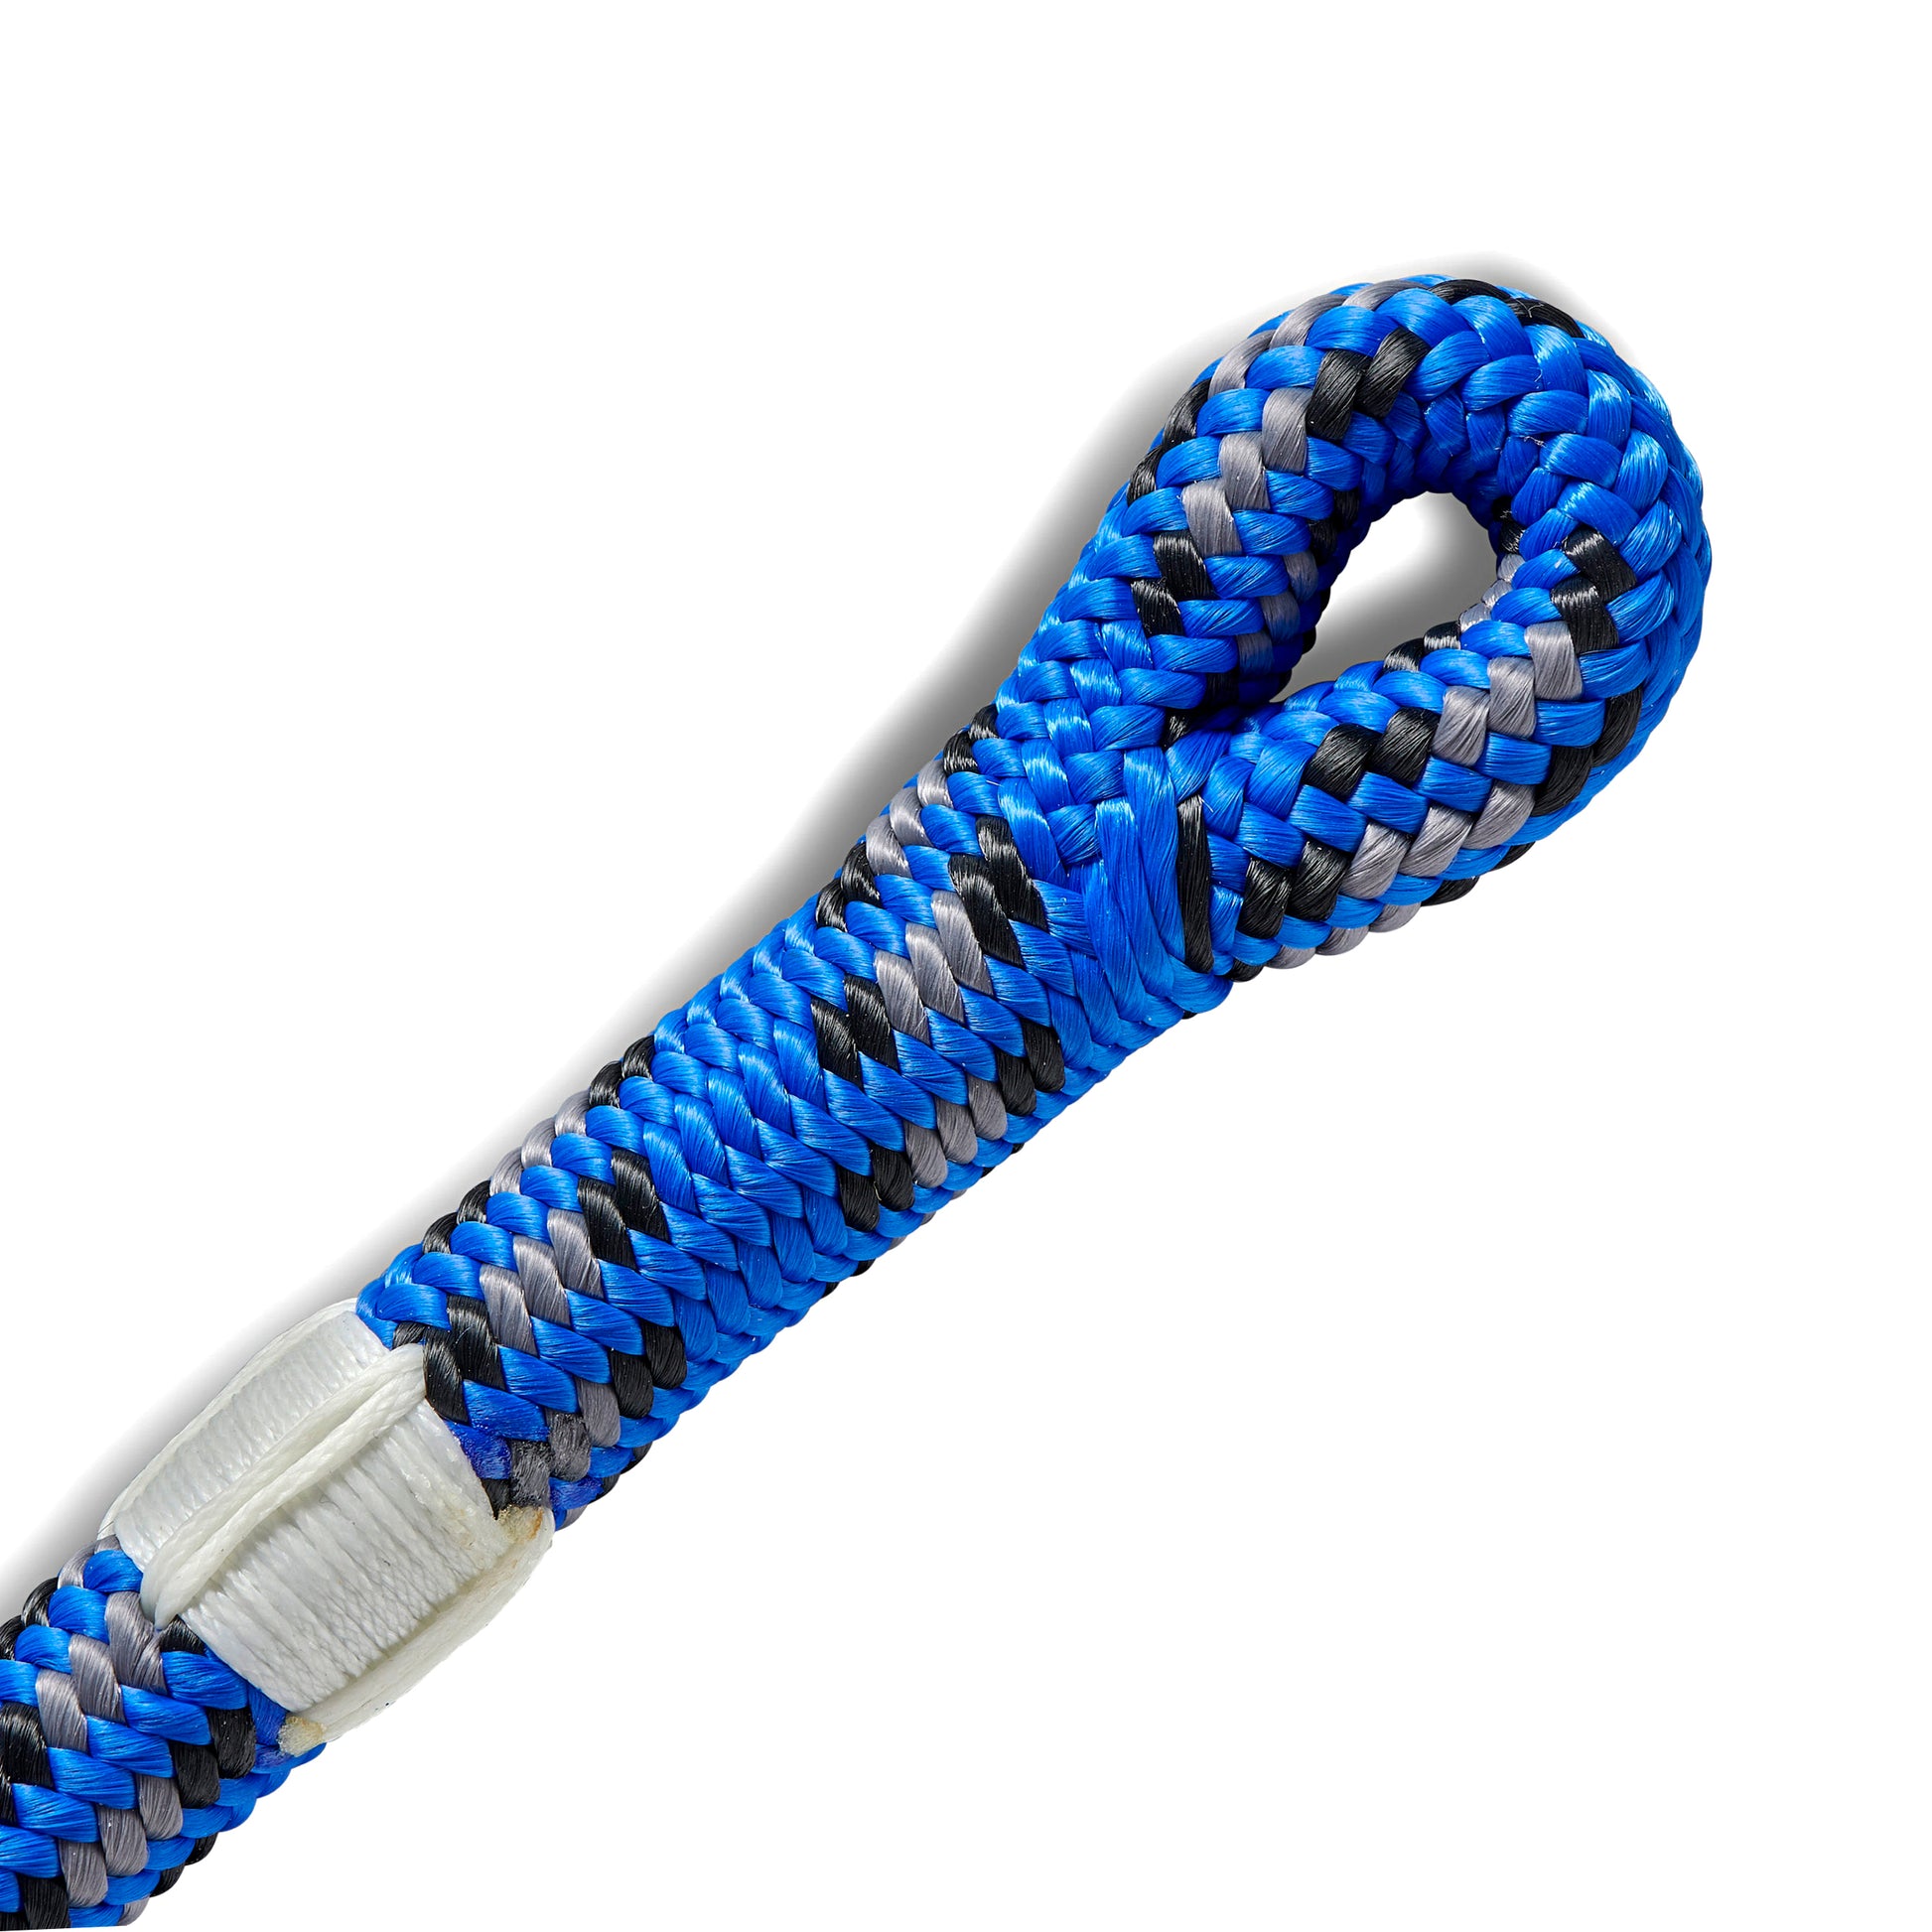 Donaghys Cougar Blue 11.7mm with Splice - LRV8 Rescue